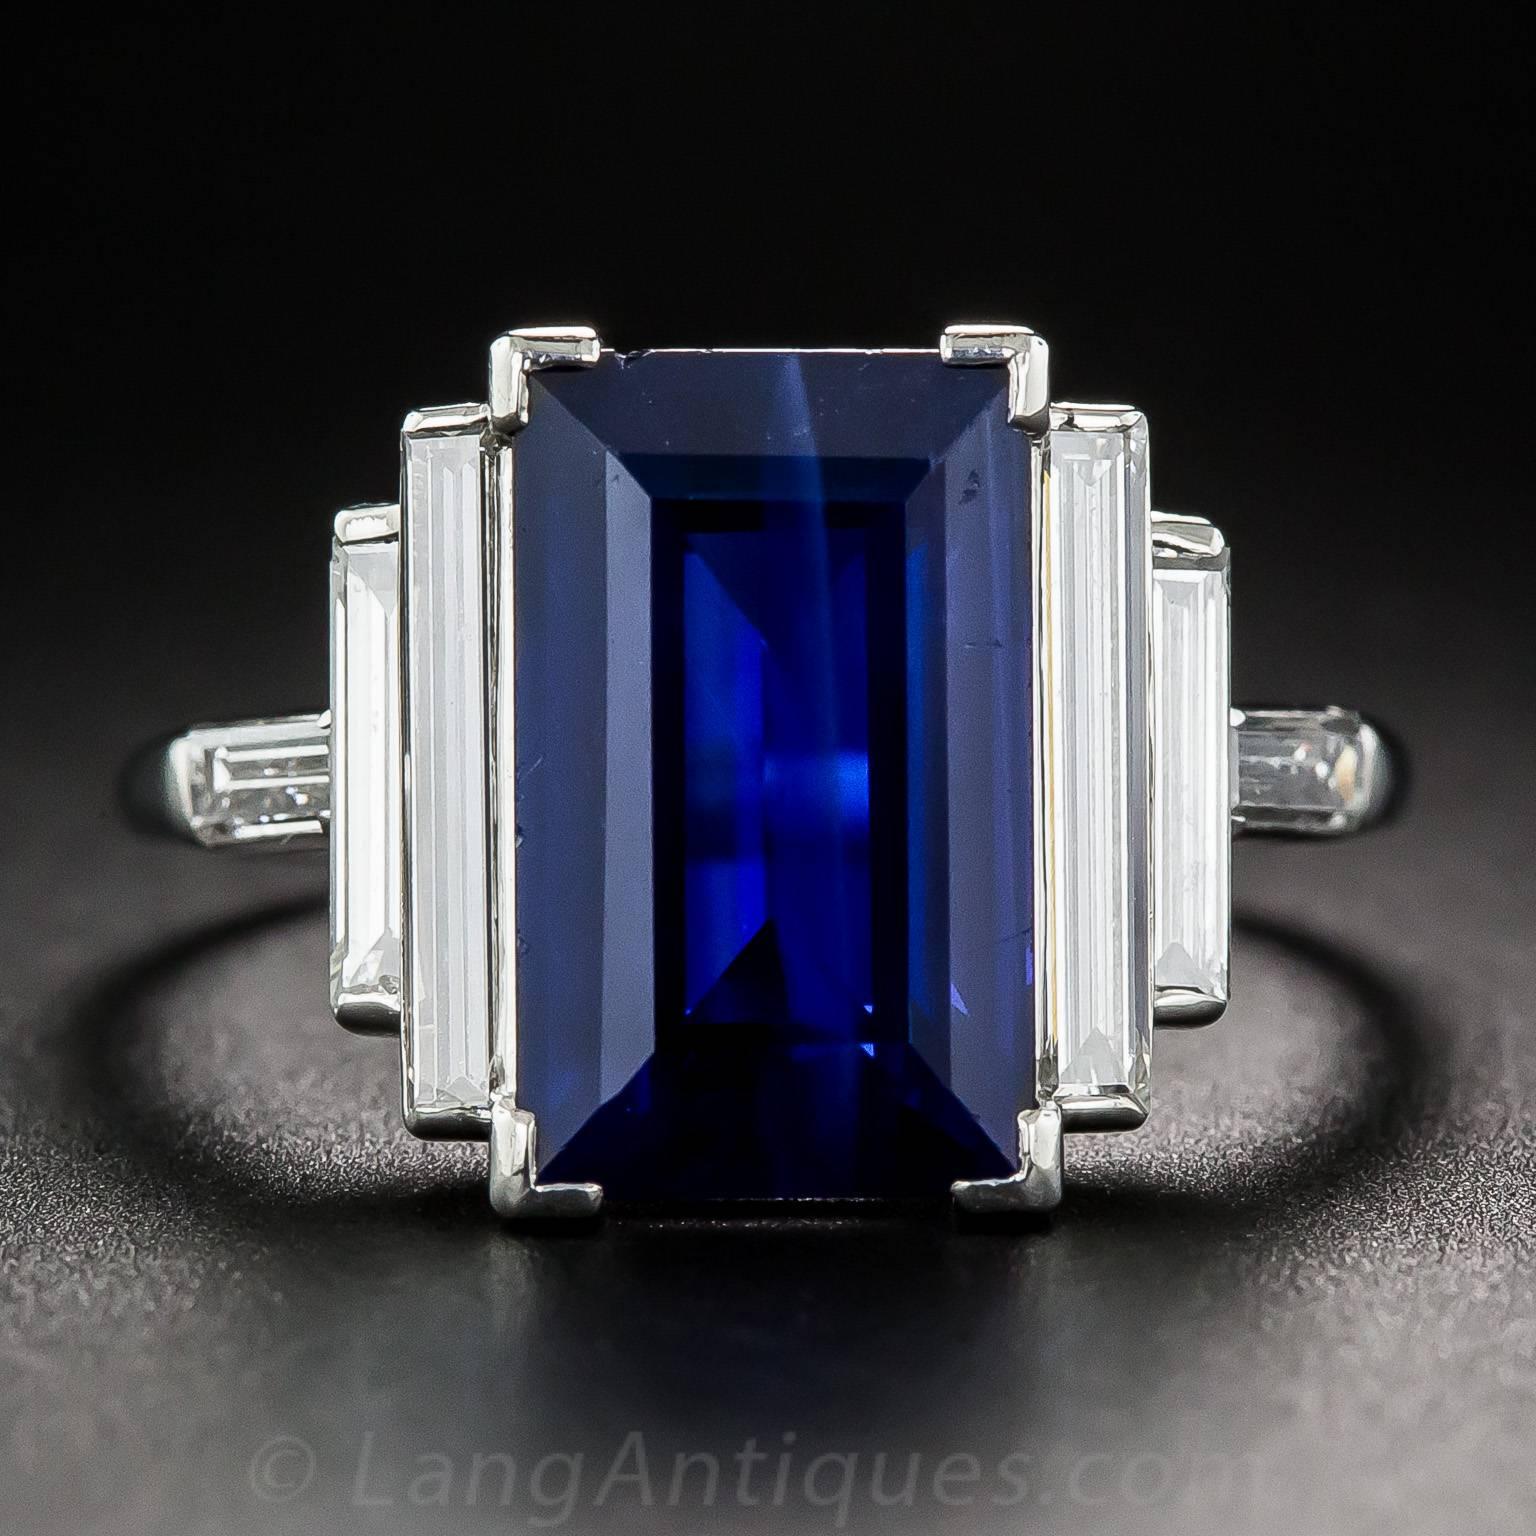 Sleek, sophisticated and sexy. A long and lovely emerald-cut sapphire, weighing 5 carats and exhibiting a rich royal blue hue, glistens between two pairs of extra-long and slender straight baguette diamonds, plus a perpendicular pair enlivening the